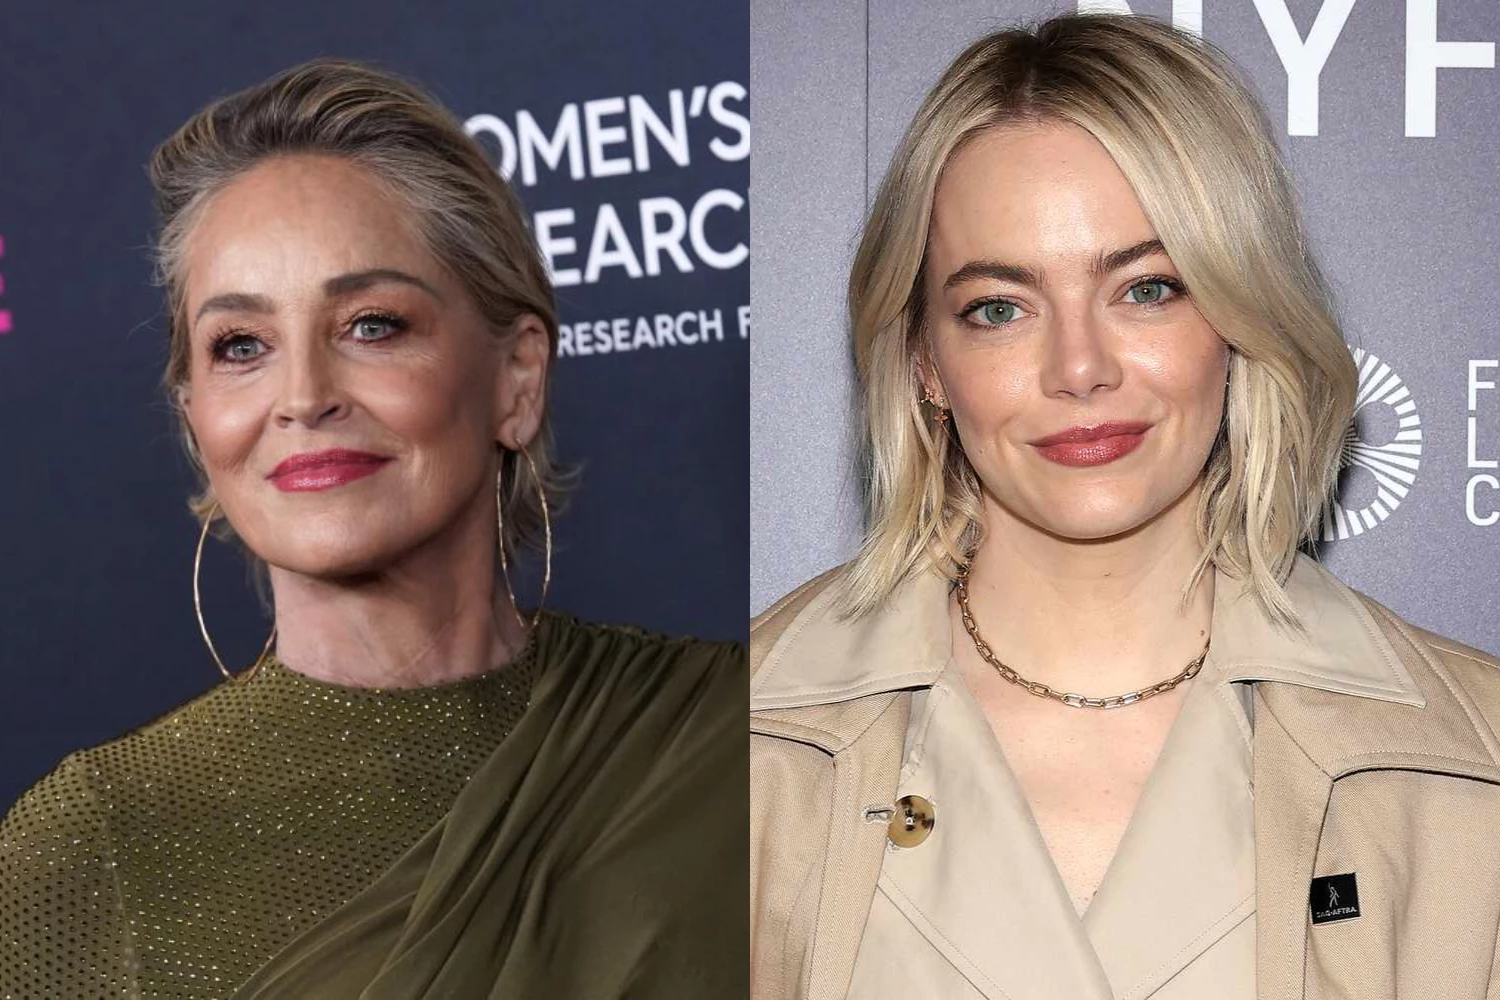 Are Sharon Stone And Emma Stone Related?